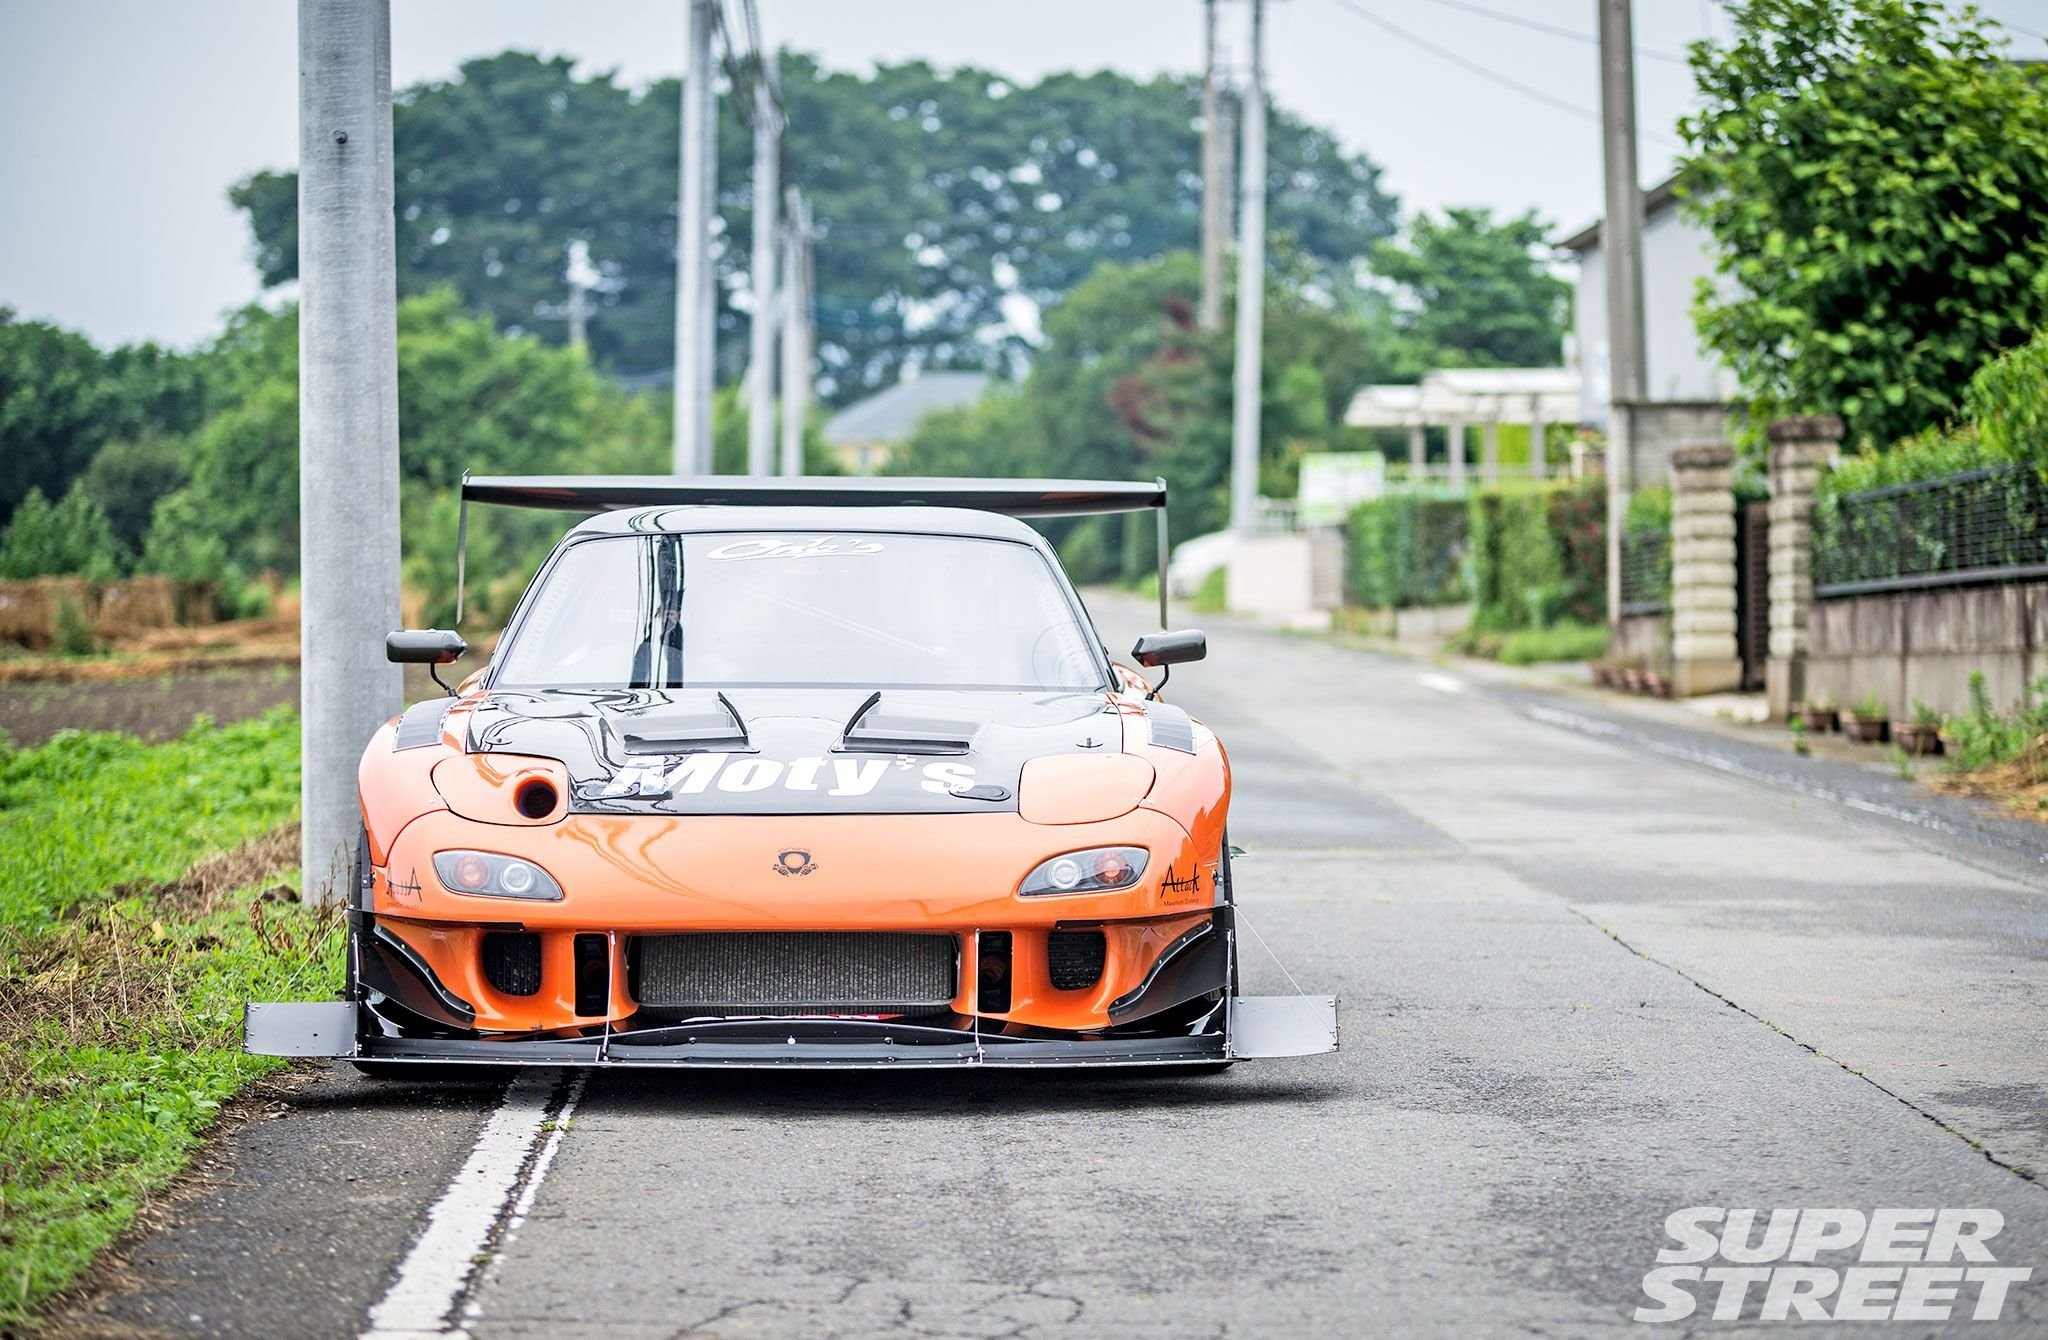 2048x1340 1998 mazda RX7 coupe cars bodykit tuning wallpaper |  | 652036 |  WallpaperUP